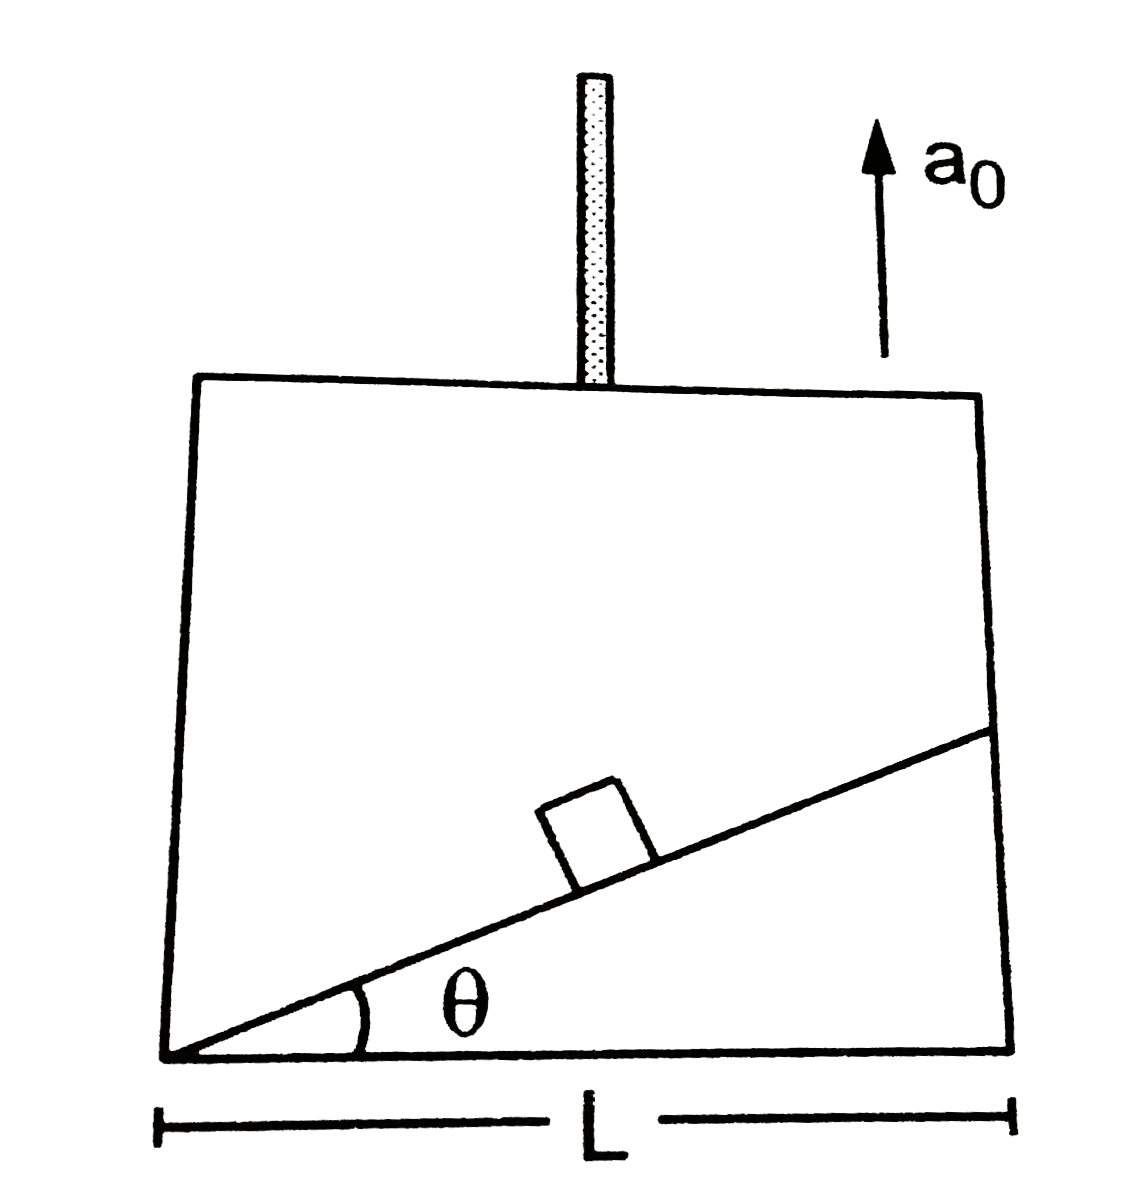 A particle slides down a smooth in clined plane of elevation theta fixed in an elevastor going up with an accelerationa0. The base of the incline has a length L.Find the time taken by the particle to reach the bottom.